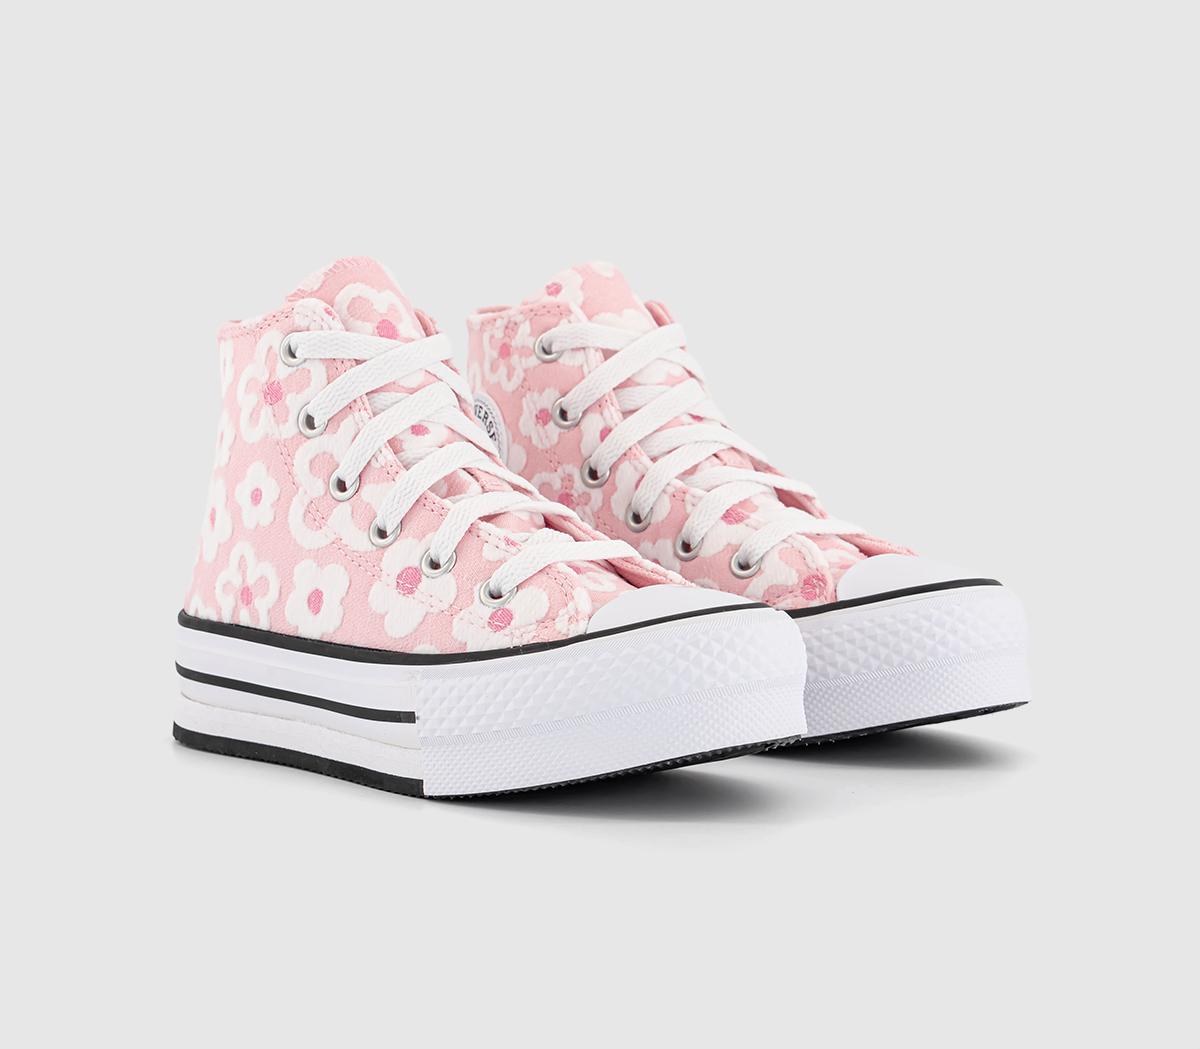 Converse Kids All Star Eva Lift Hi Trainers Donut Glaze Oops Pink White, 1 Youth